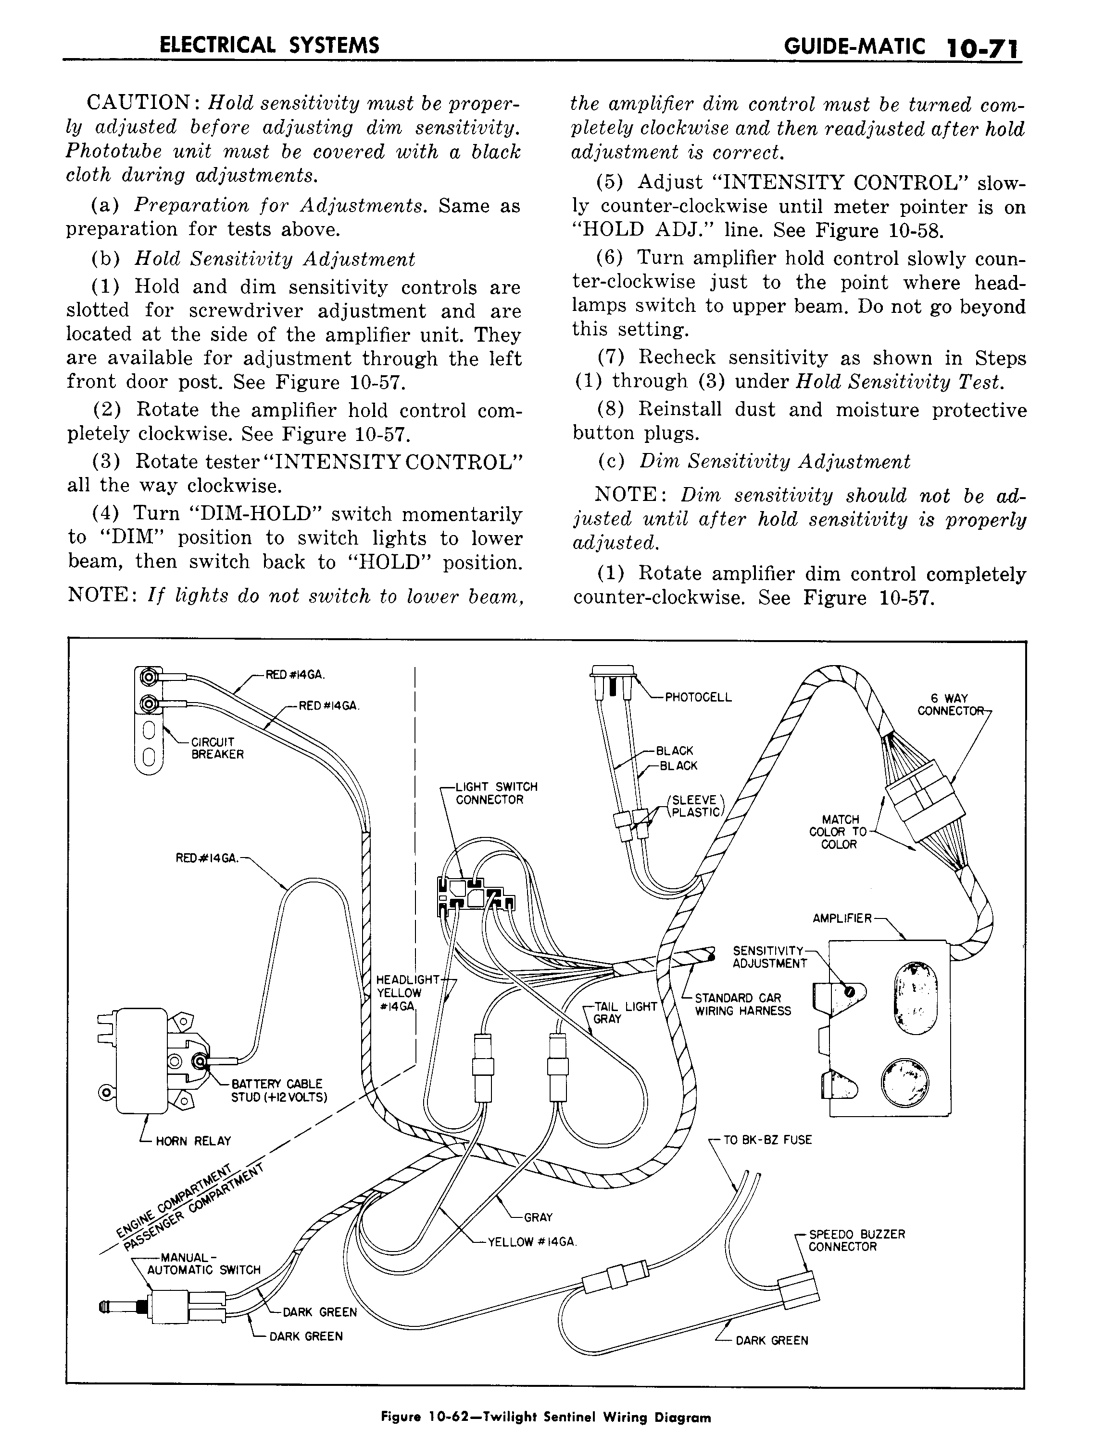 n_11 1960 Buick Shop Manual - Electrical Systems-071-071.jpg